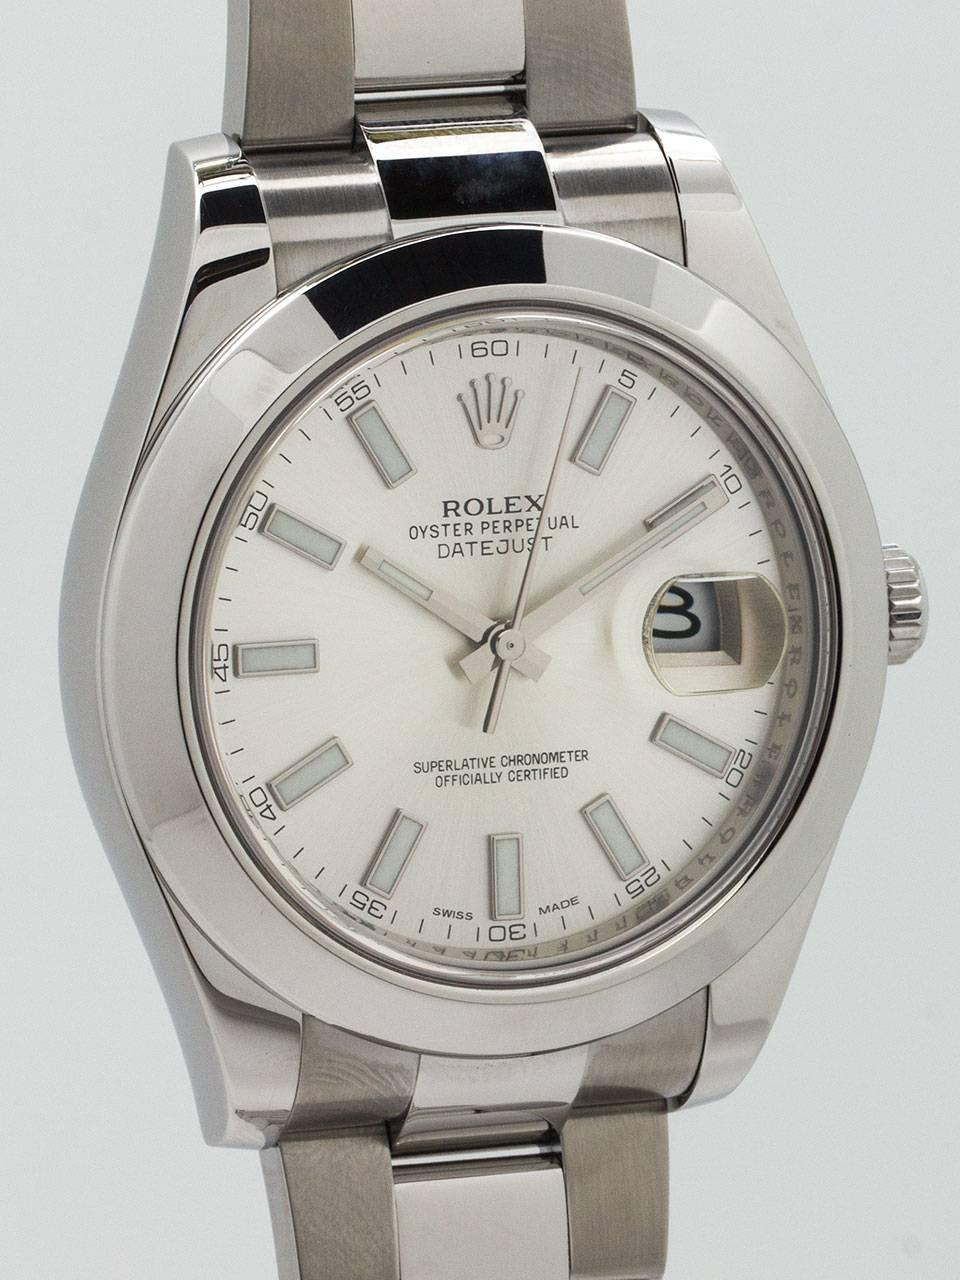 Rolex Stainless Steel Datejust ll ref 116300 random serial #77F circa 2013. 
New style large 41mm Oyster case with wide dome bezel and sapphire crystal. Silvered satin dial with broad luminova indexes and broad baton hands. Powered by self winding